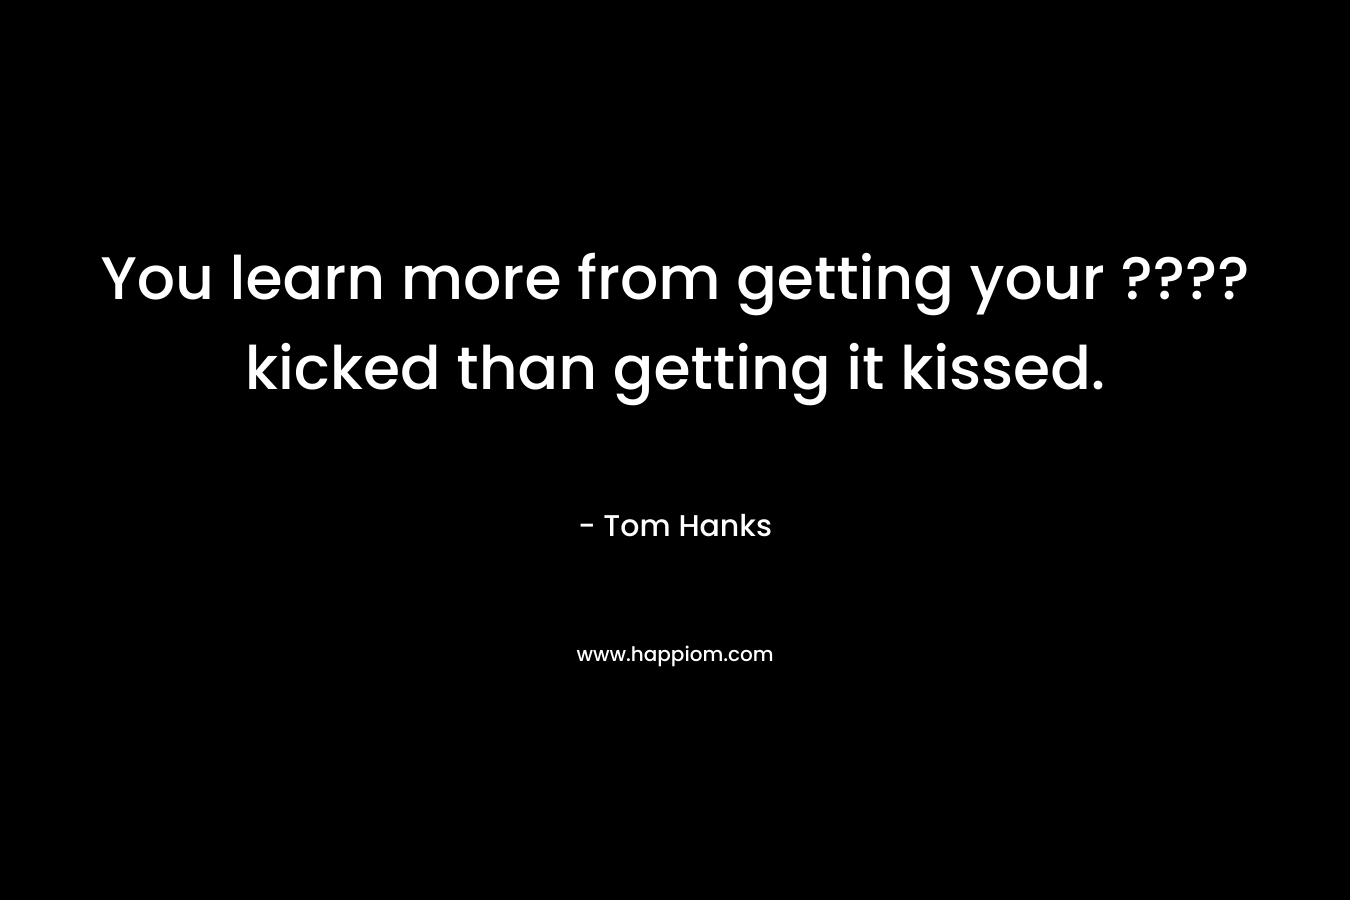 You learn more from getting your ???? kicked than getting it kissed.